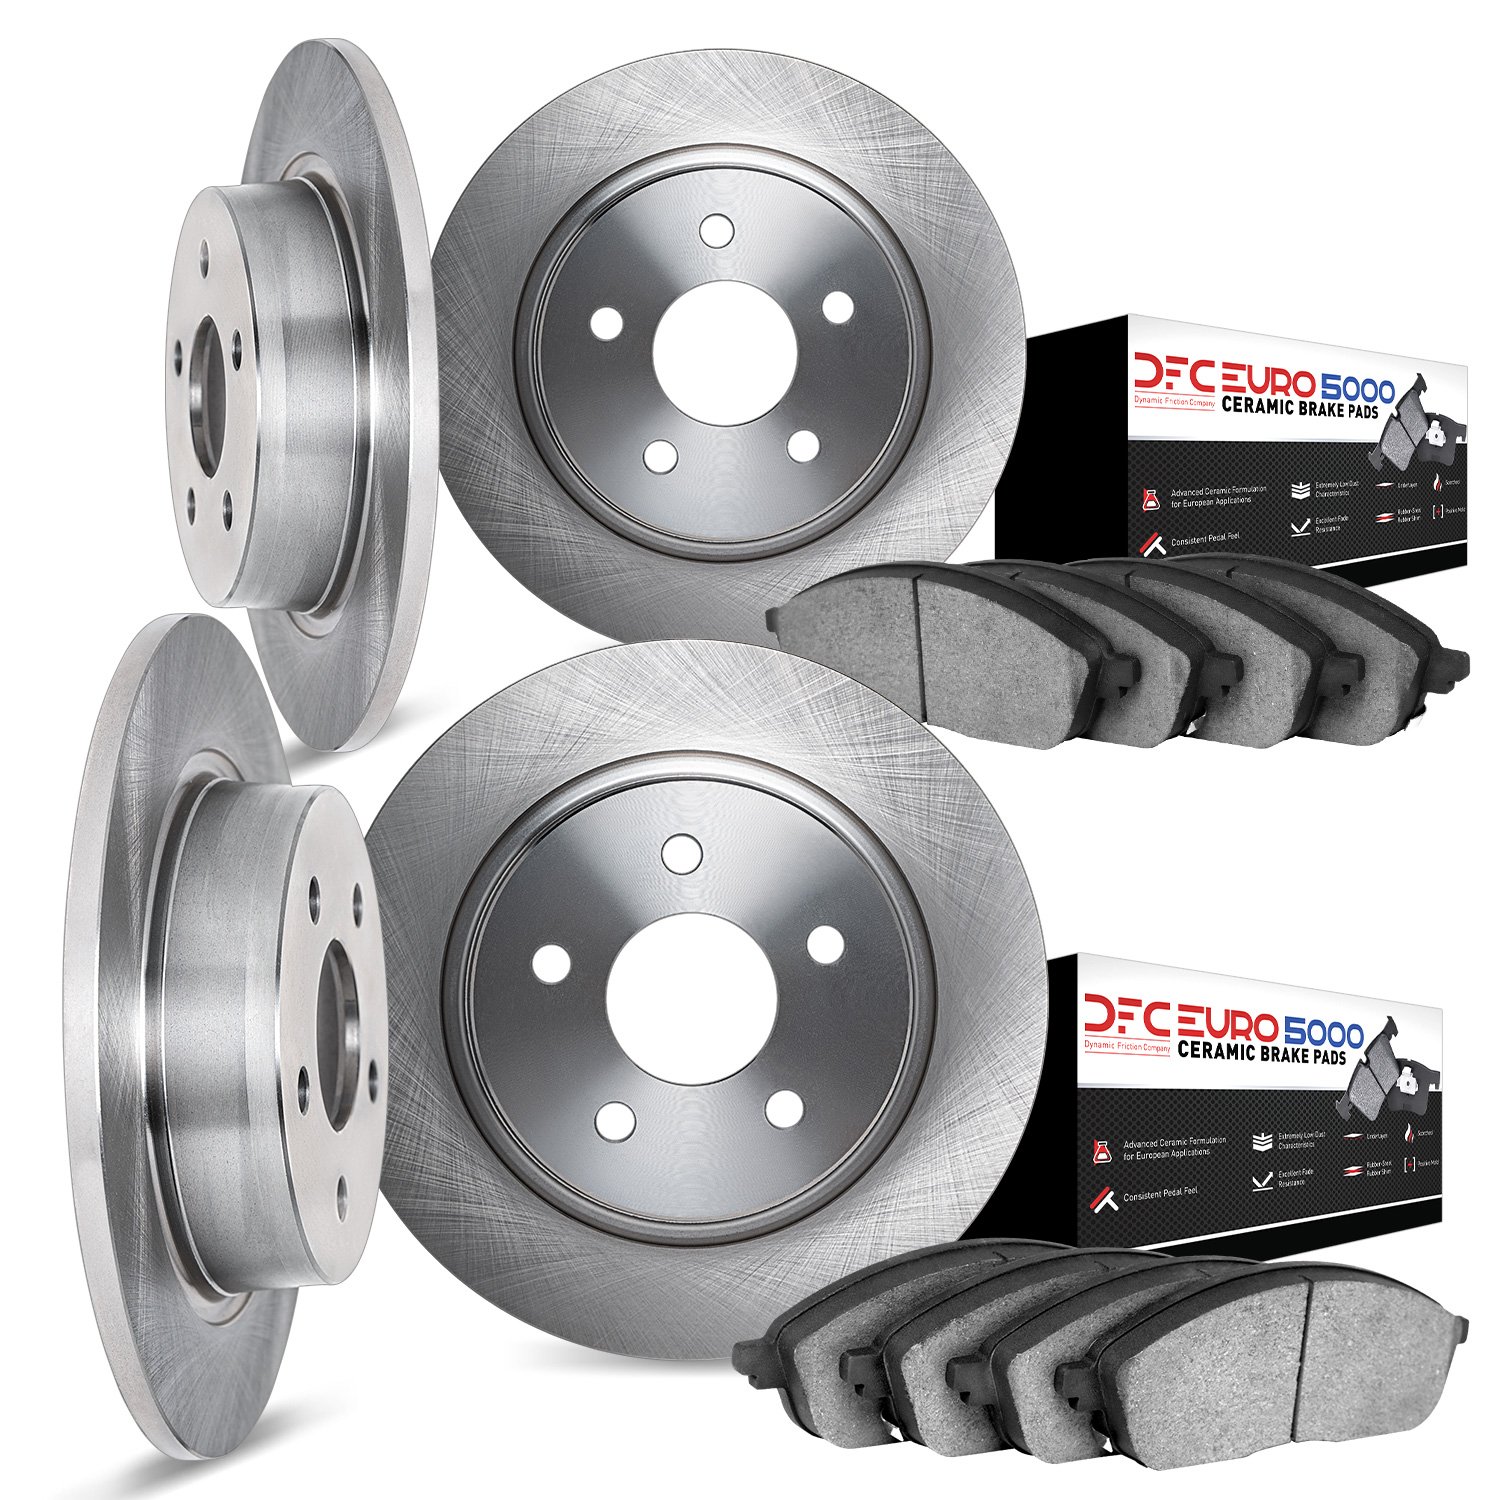 6604-27000 Brake Rotors w/5000 Euro Ceramic Brake Pads, 1975-1987 Volvo, Position: Front and Rear